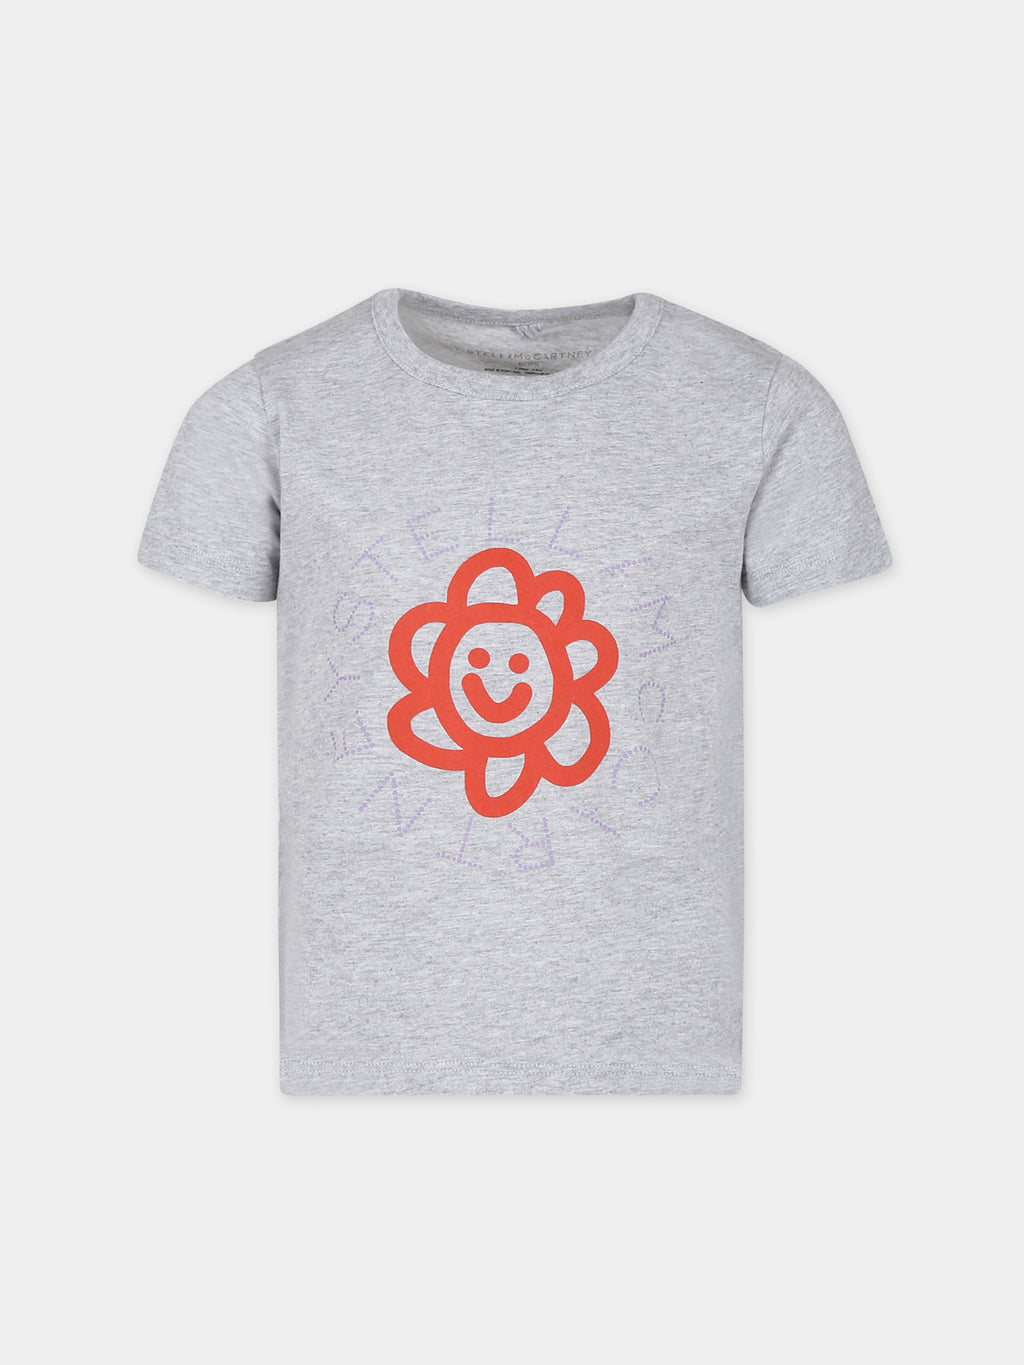 Grey t-shirt for girl with flower and logo